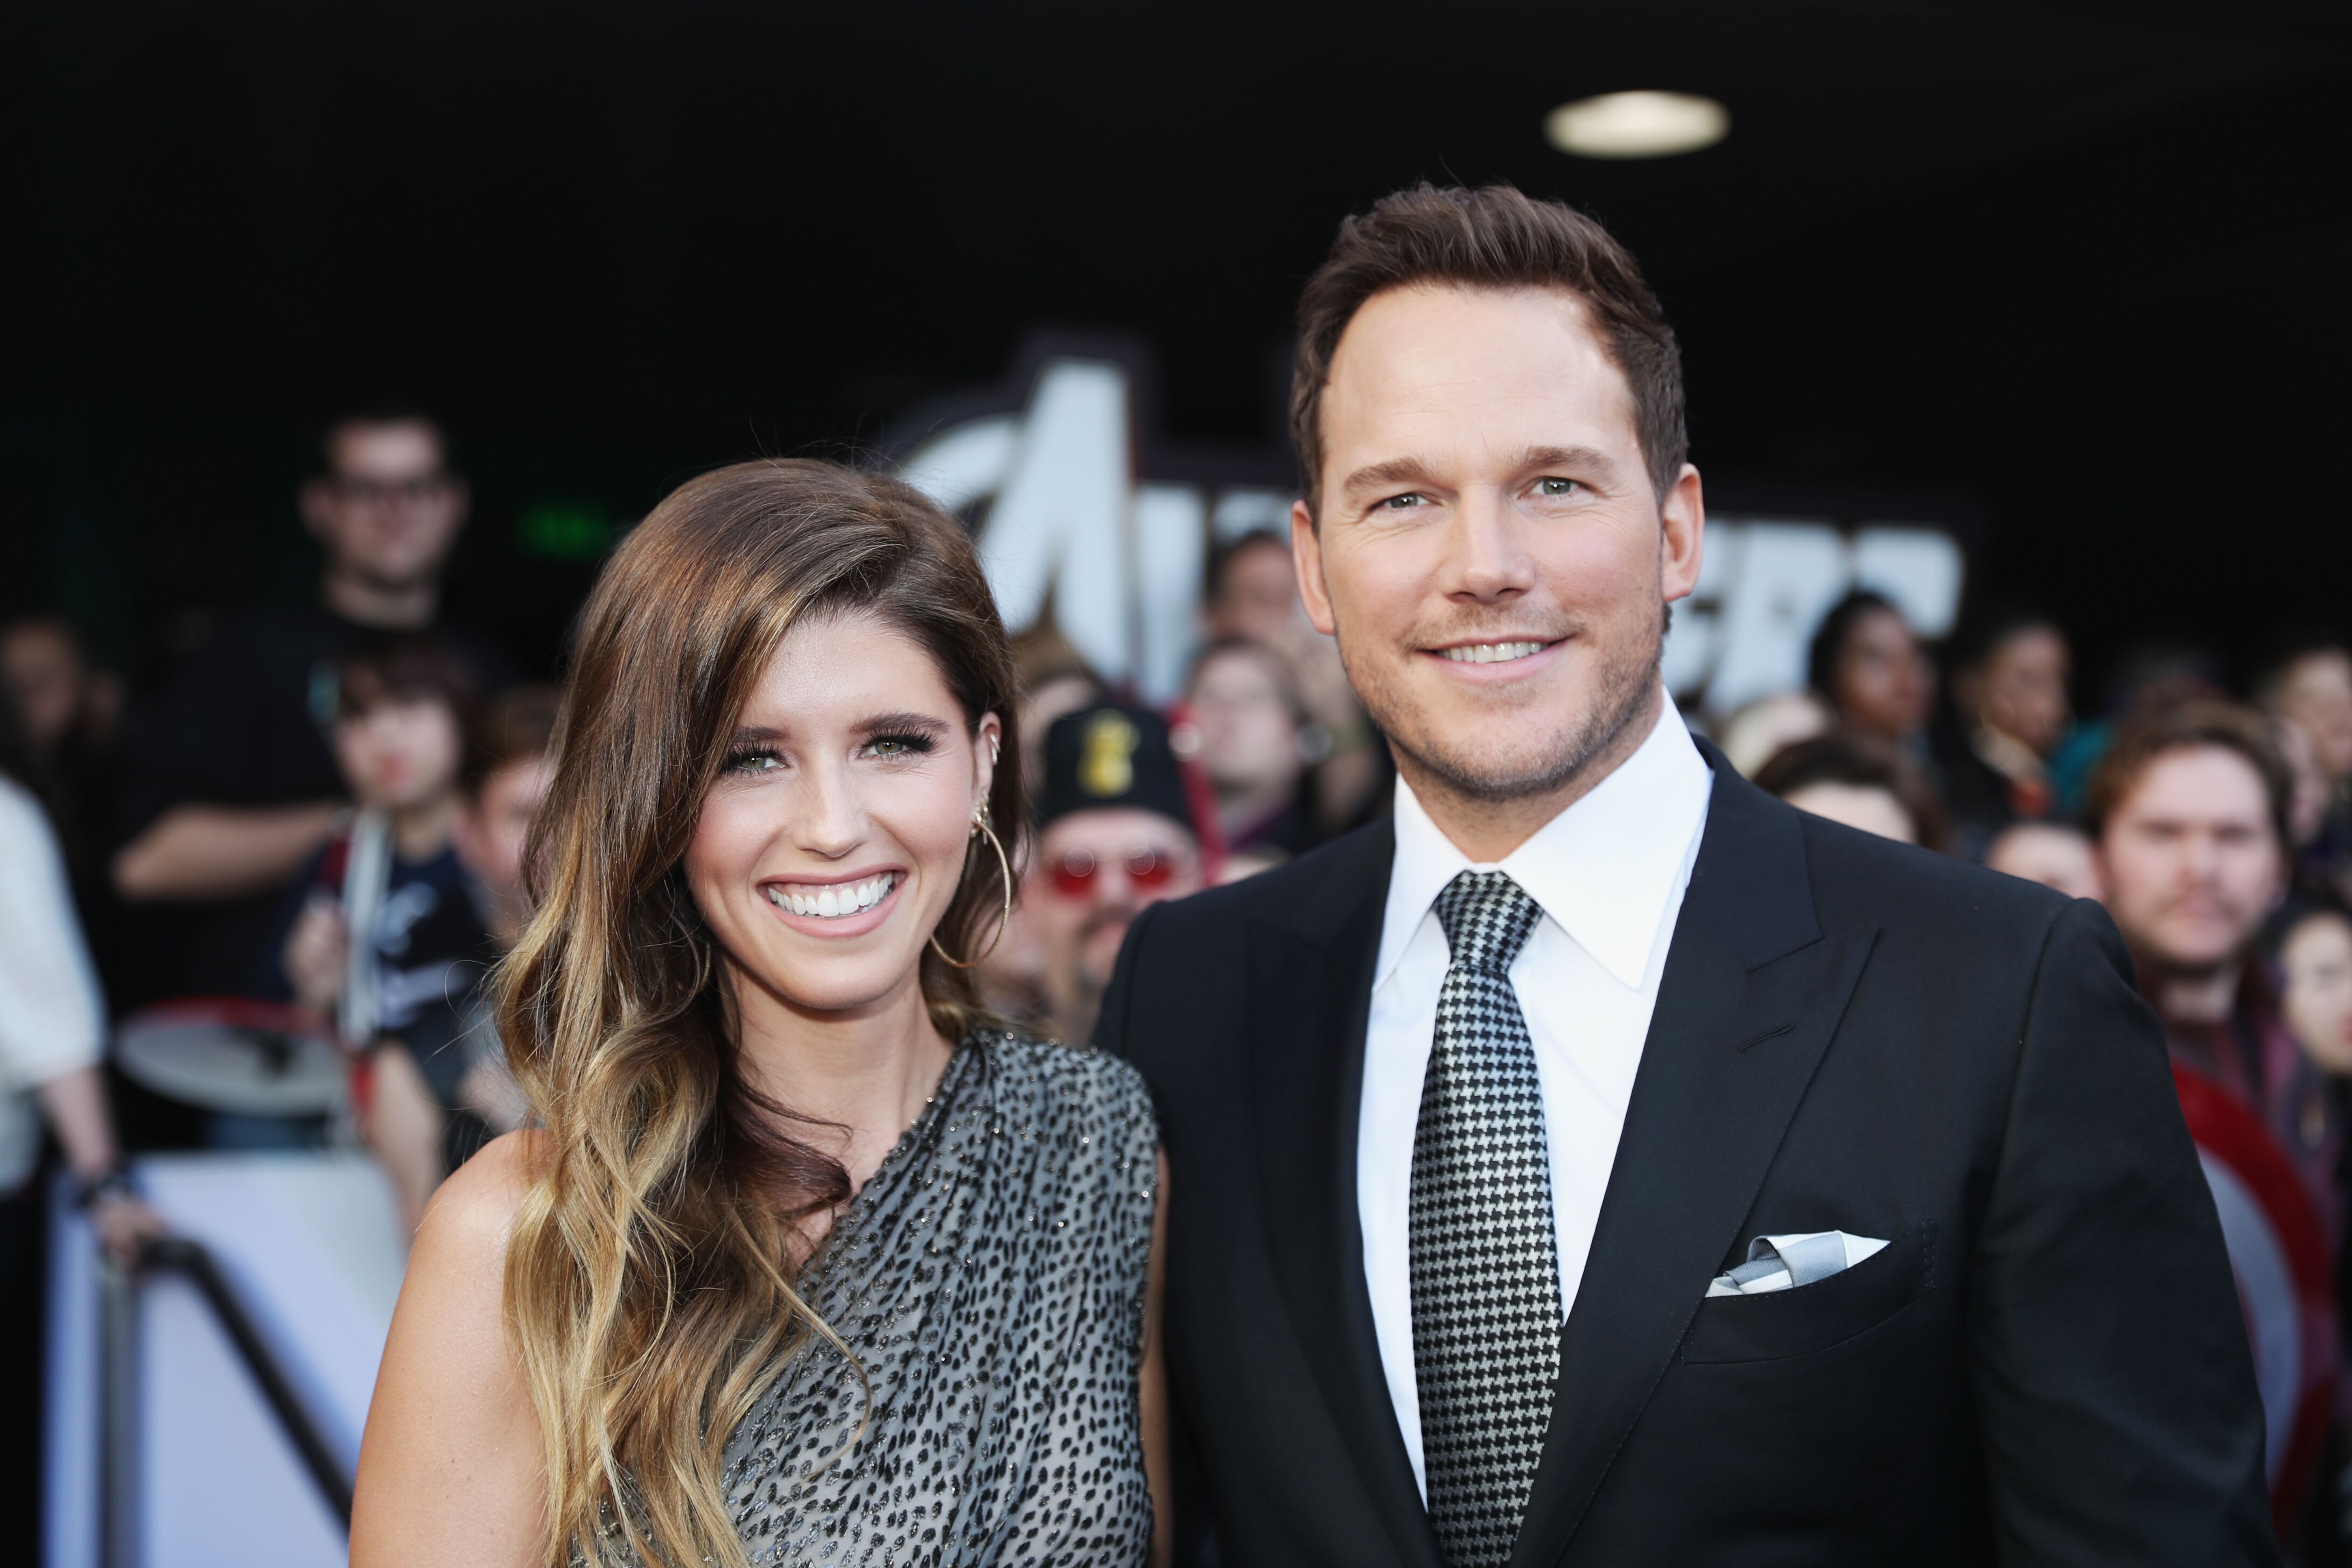 Katherine Schwarzenegger and Chris Pratt at the world premiere of "Avengers: Endgame" in Los Angeles in 2019 | Source: Getty Images